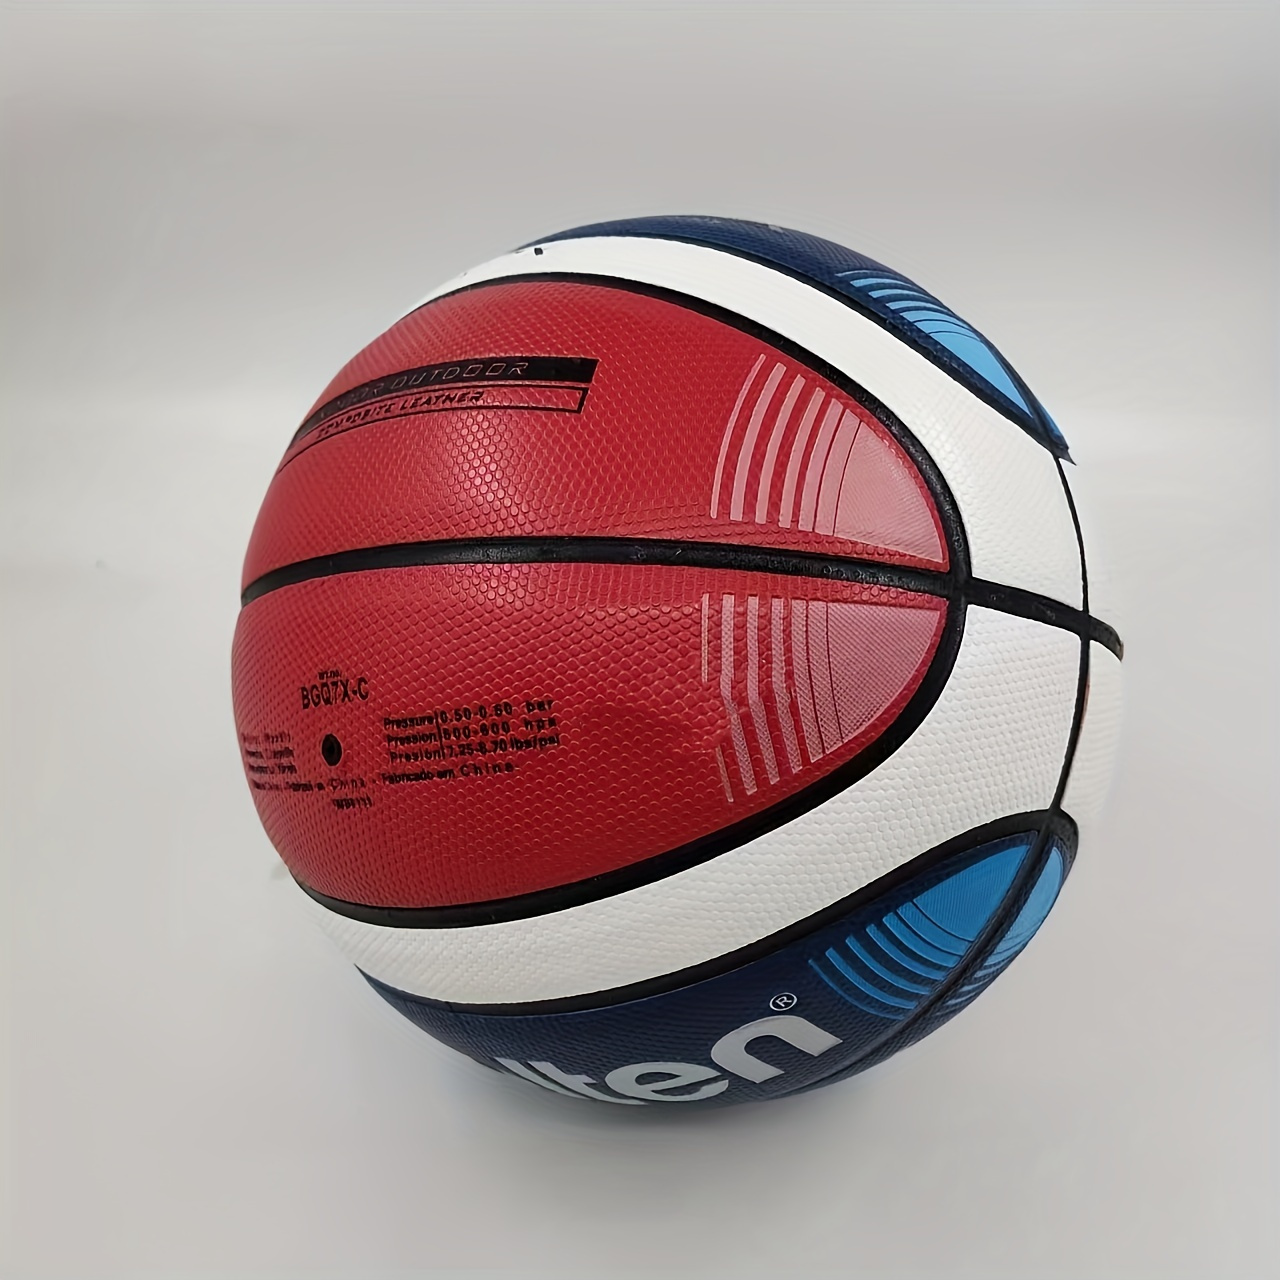 

1pc, No. 7 Sports Basketball, Wear-resistant Durable Basketball For Outdoor Indoor Training Competition